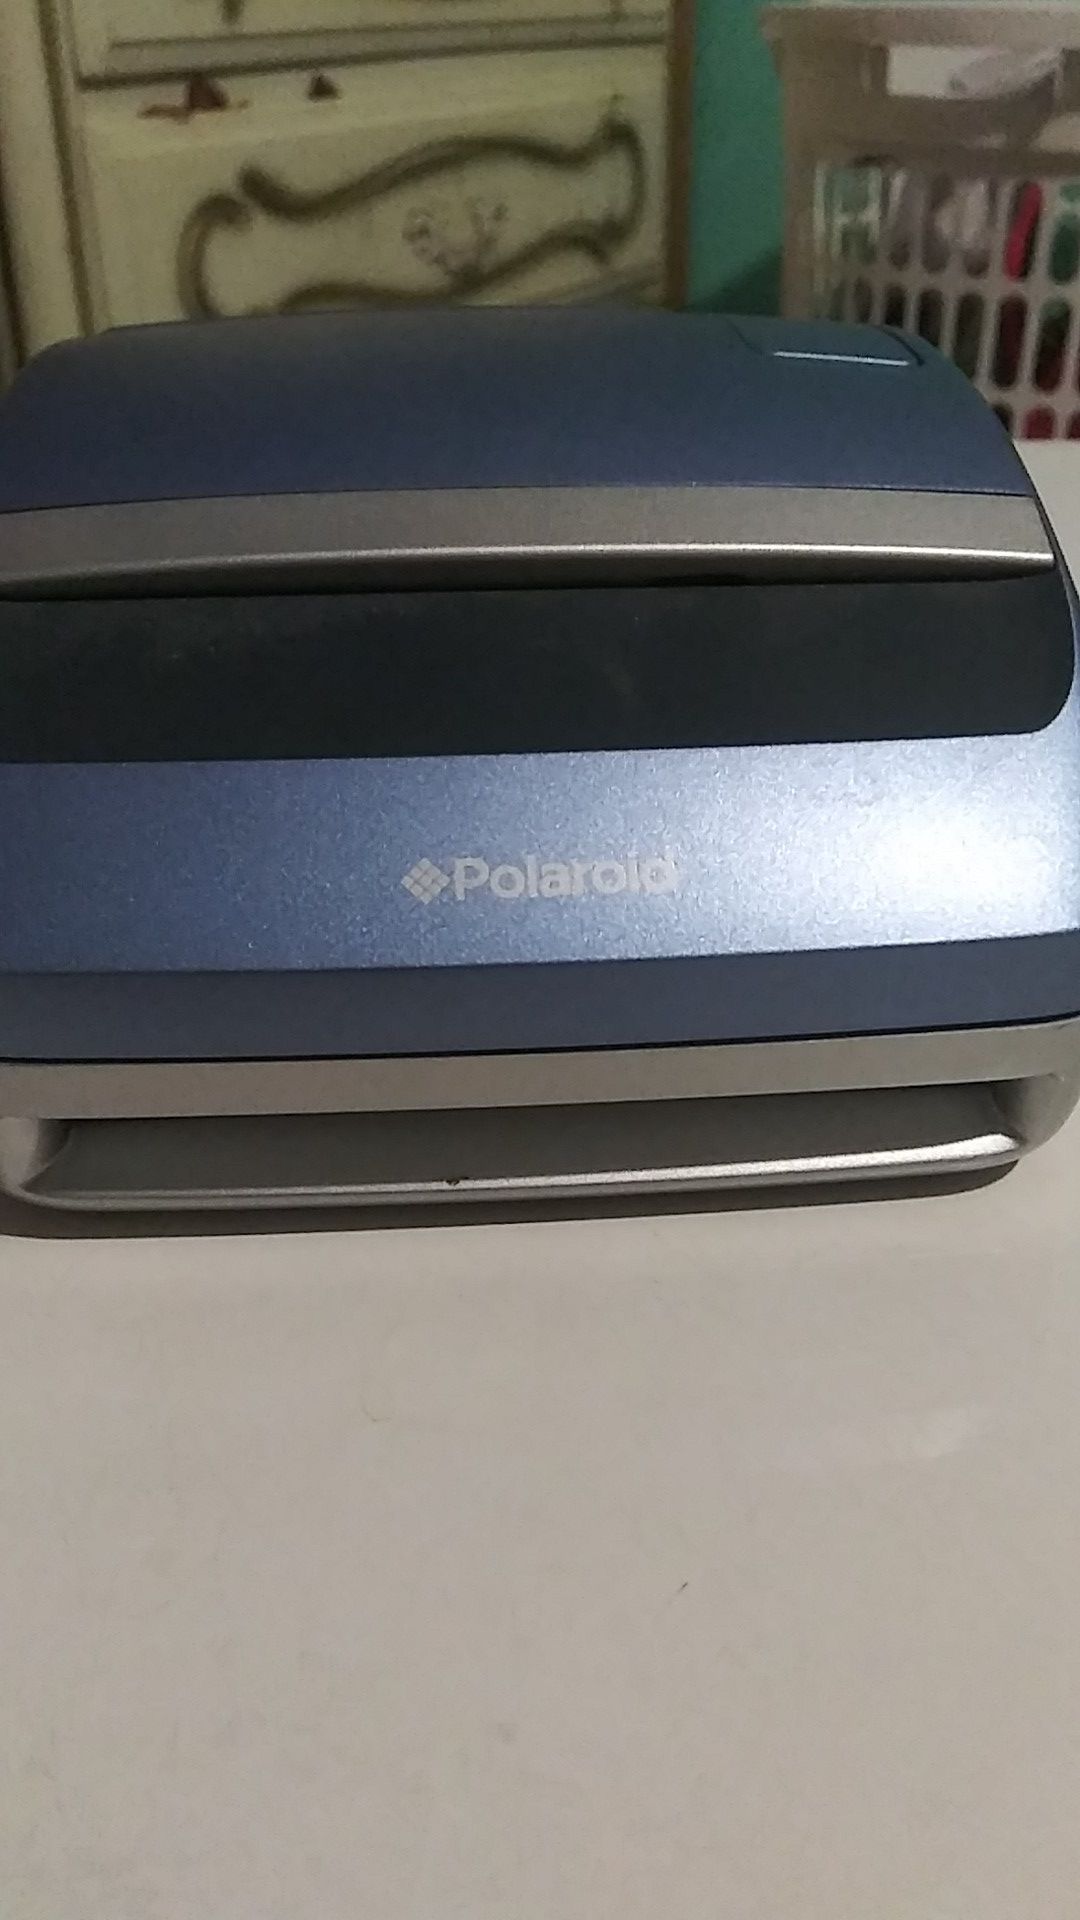 It is an old polaroid from the 1990's great condition the brand is polaroid PRICE IS NEGOTIABLE I WANT TO GET RID OF IT